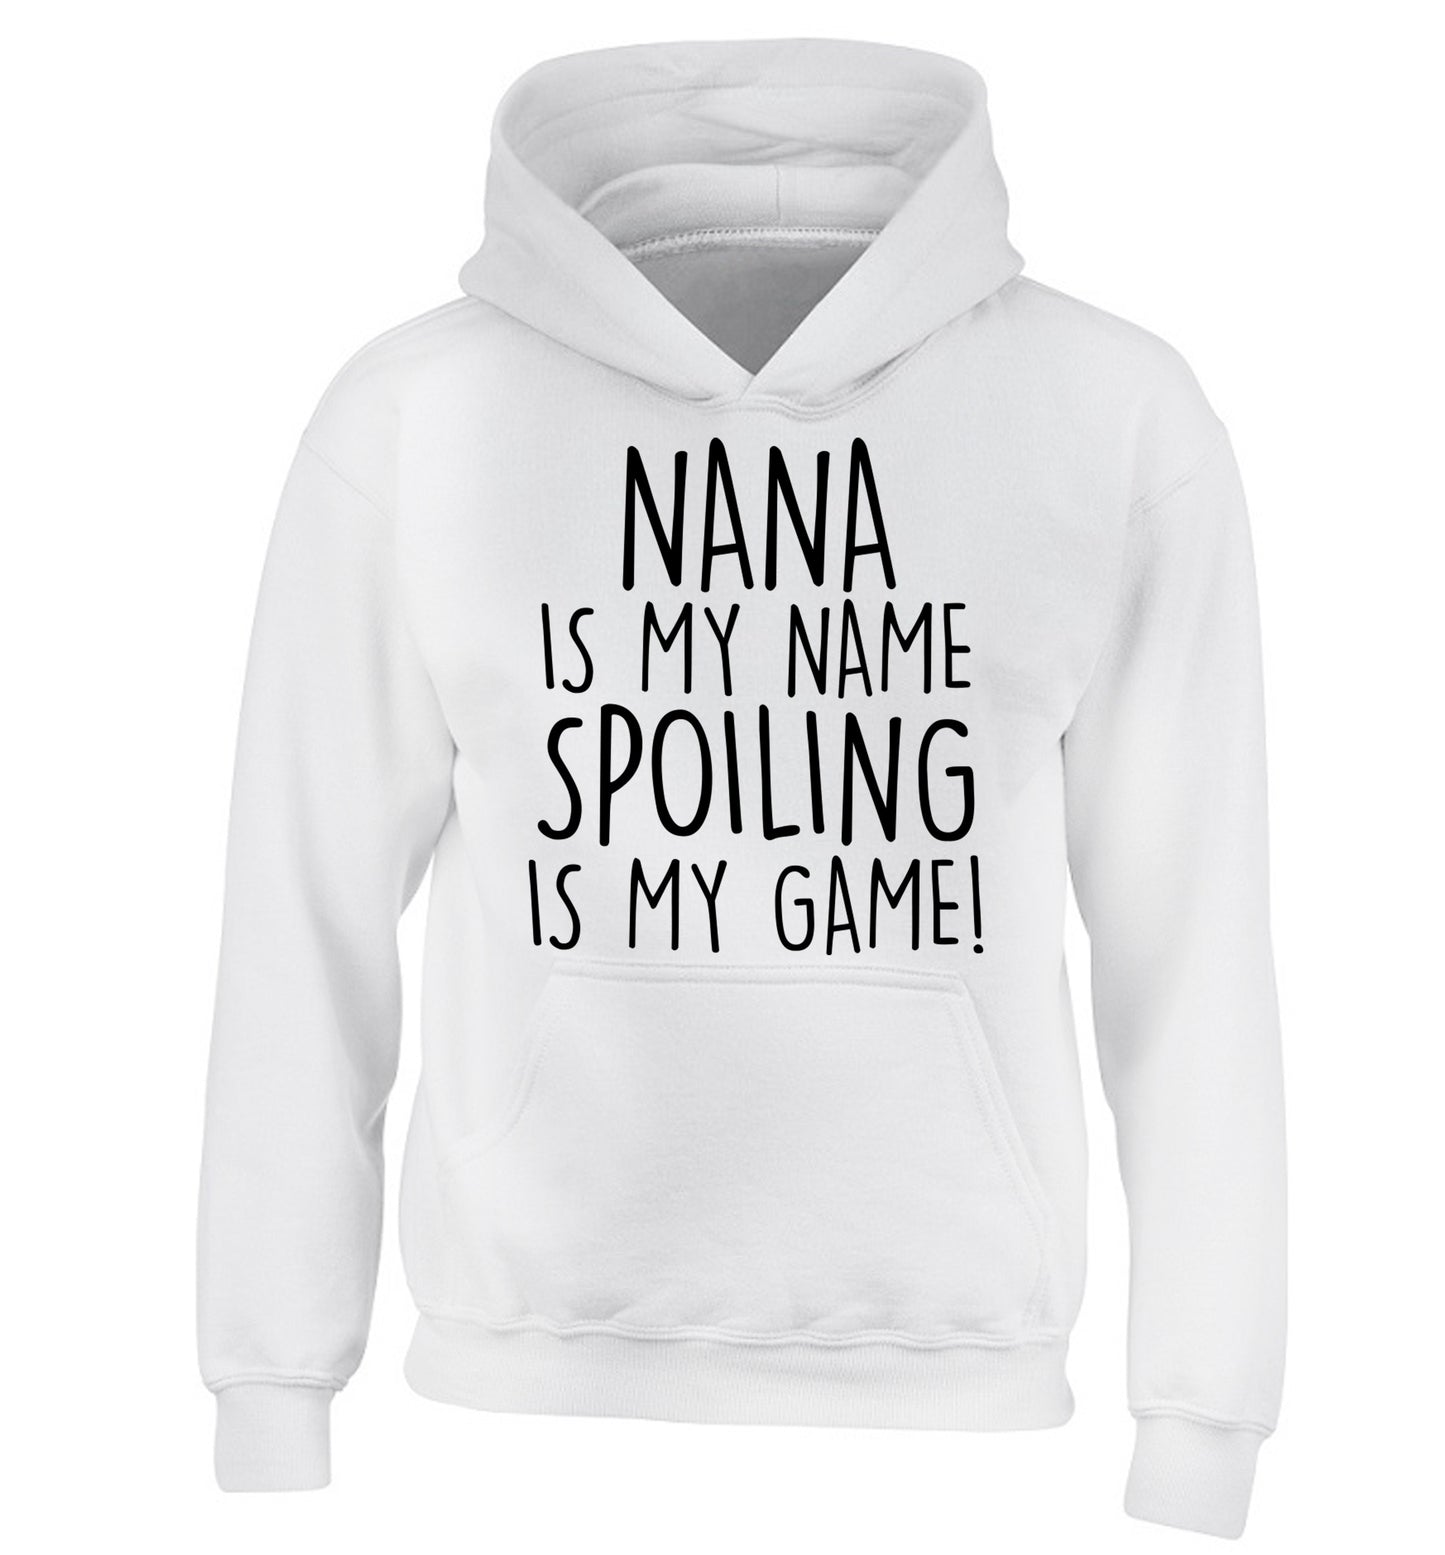 Nana is my name, spoiling is my game children's white hoodie 12-14 Years